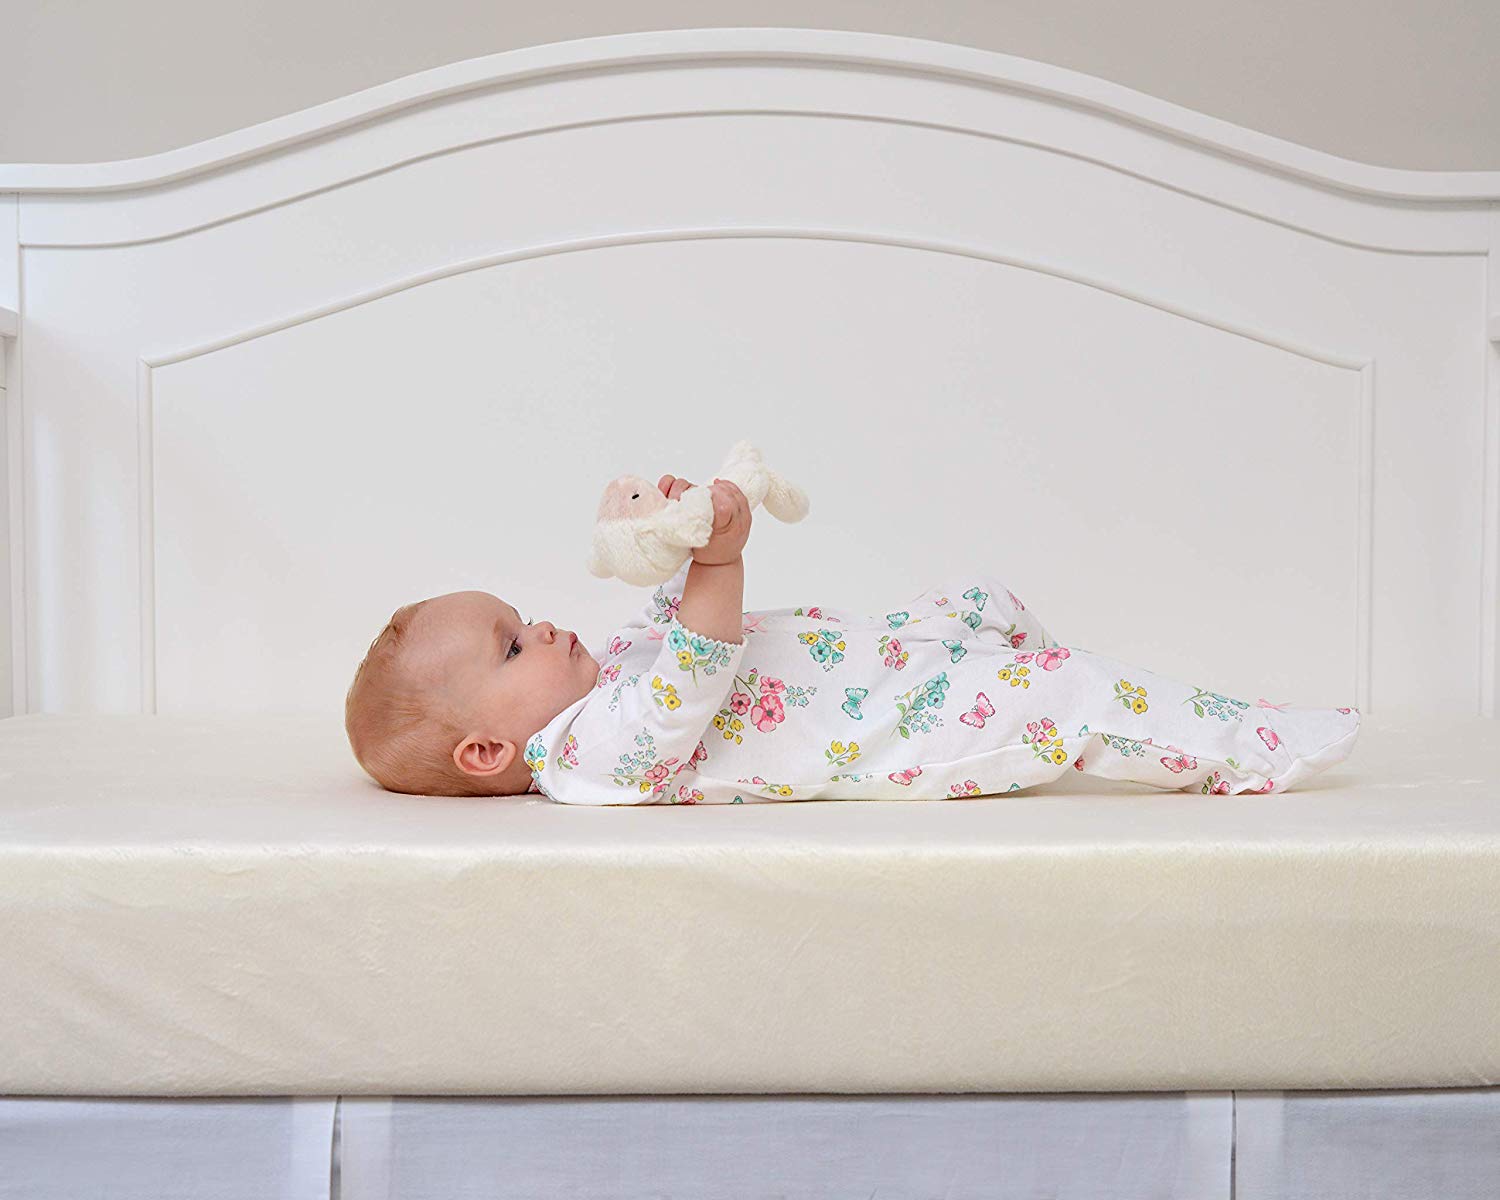 mattresses materials for infant beds